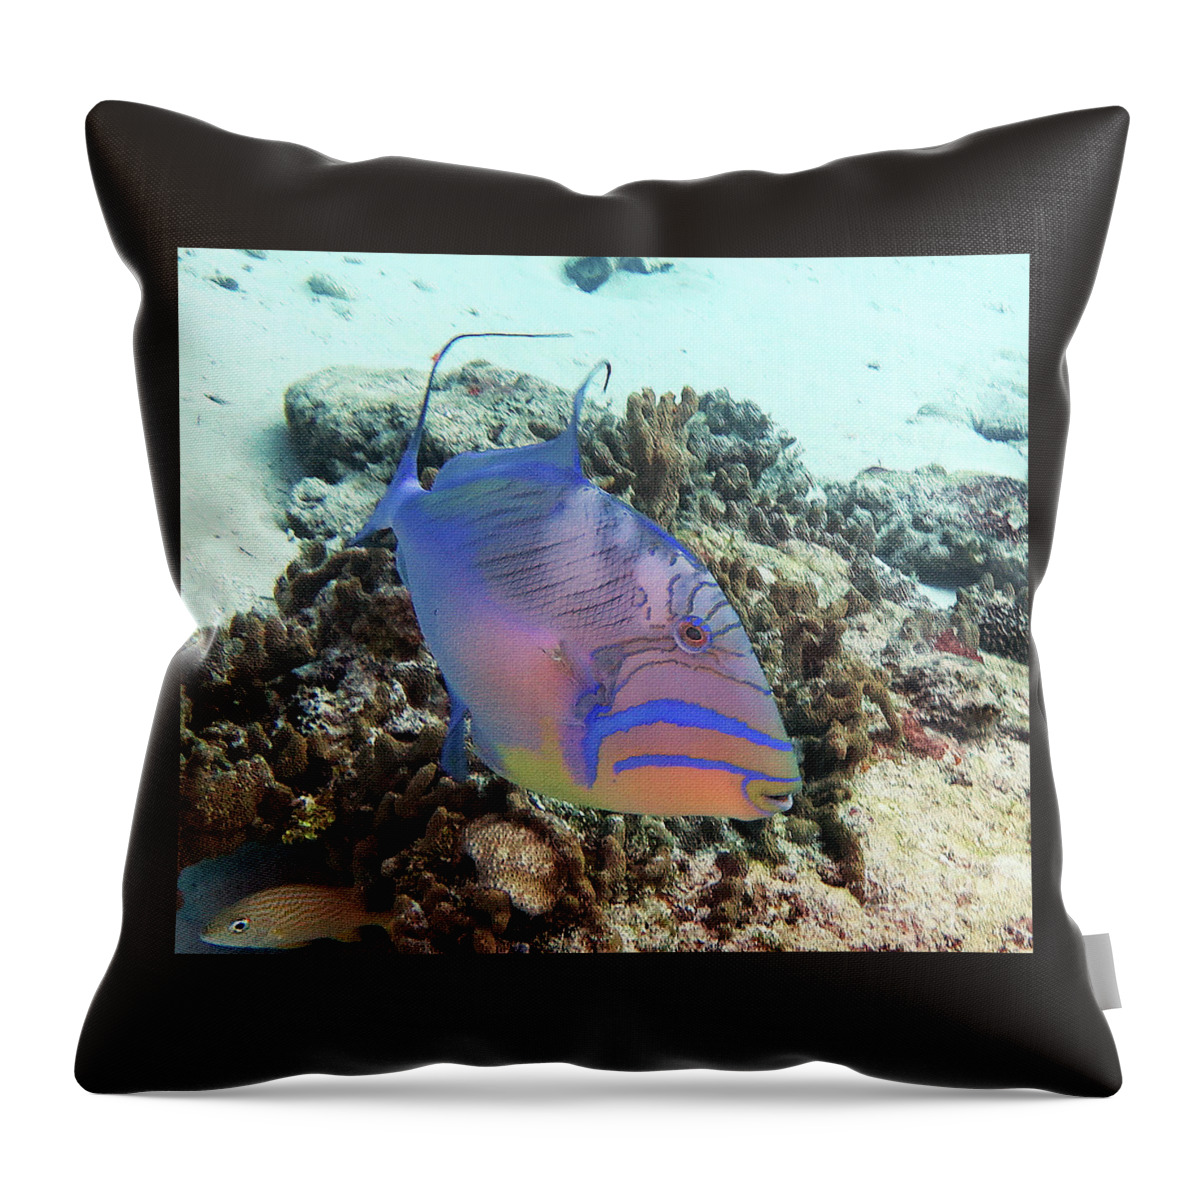 Underwater Throw Pillow featuring the photograph Queen Triggerfish 4 by Daryl Duda